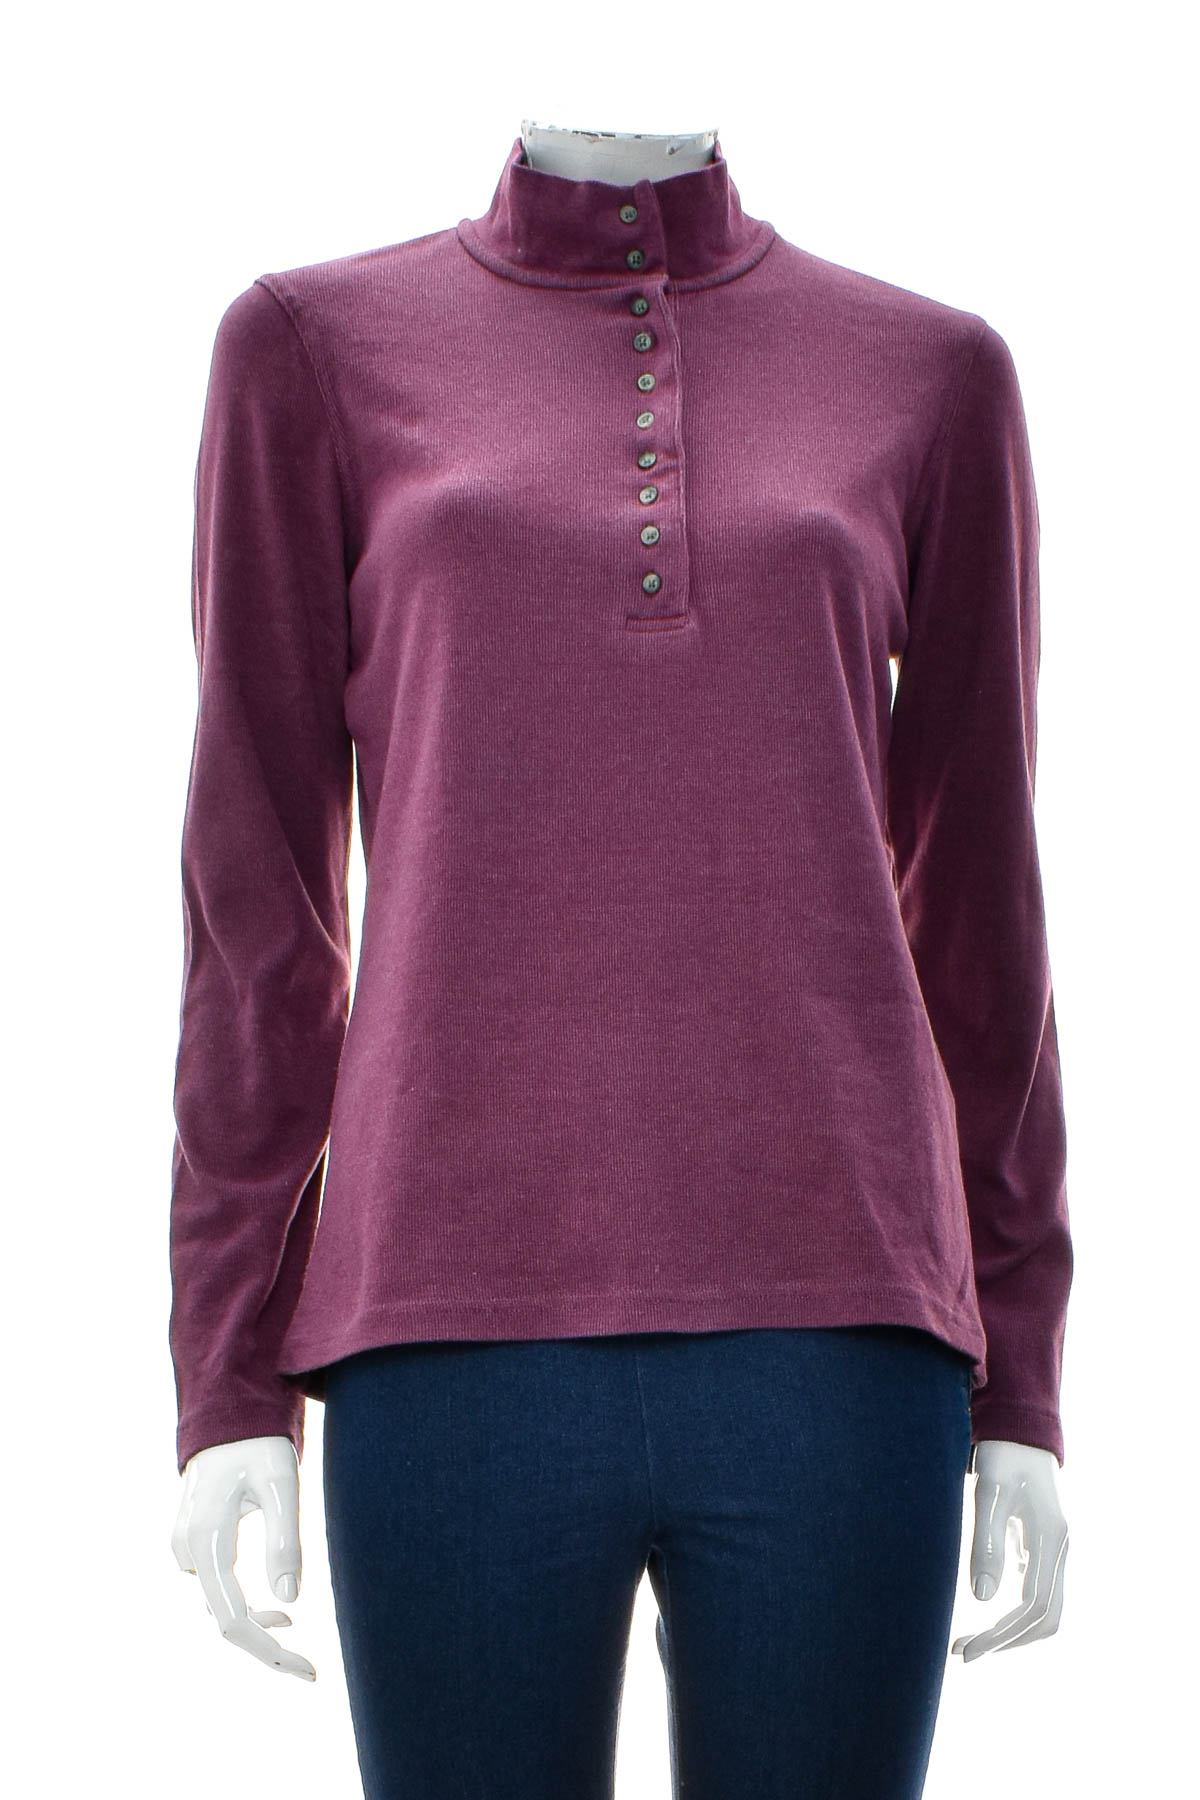 Women's sweater - NATURAL REFLECTIONS - 0